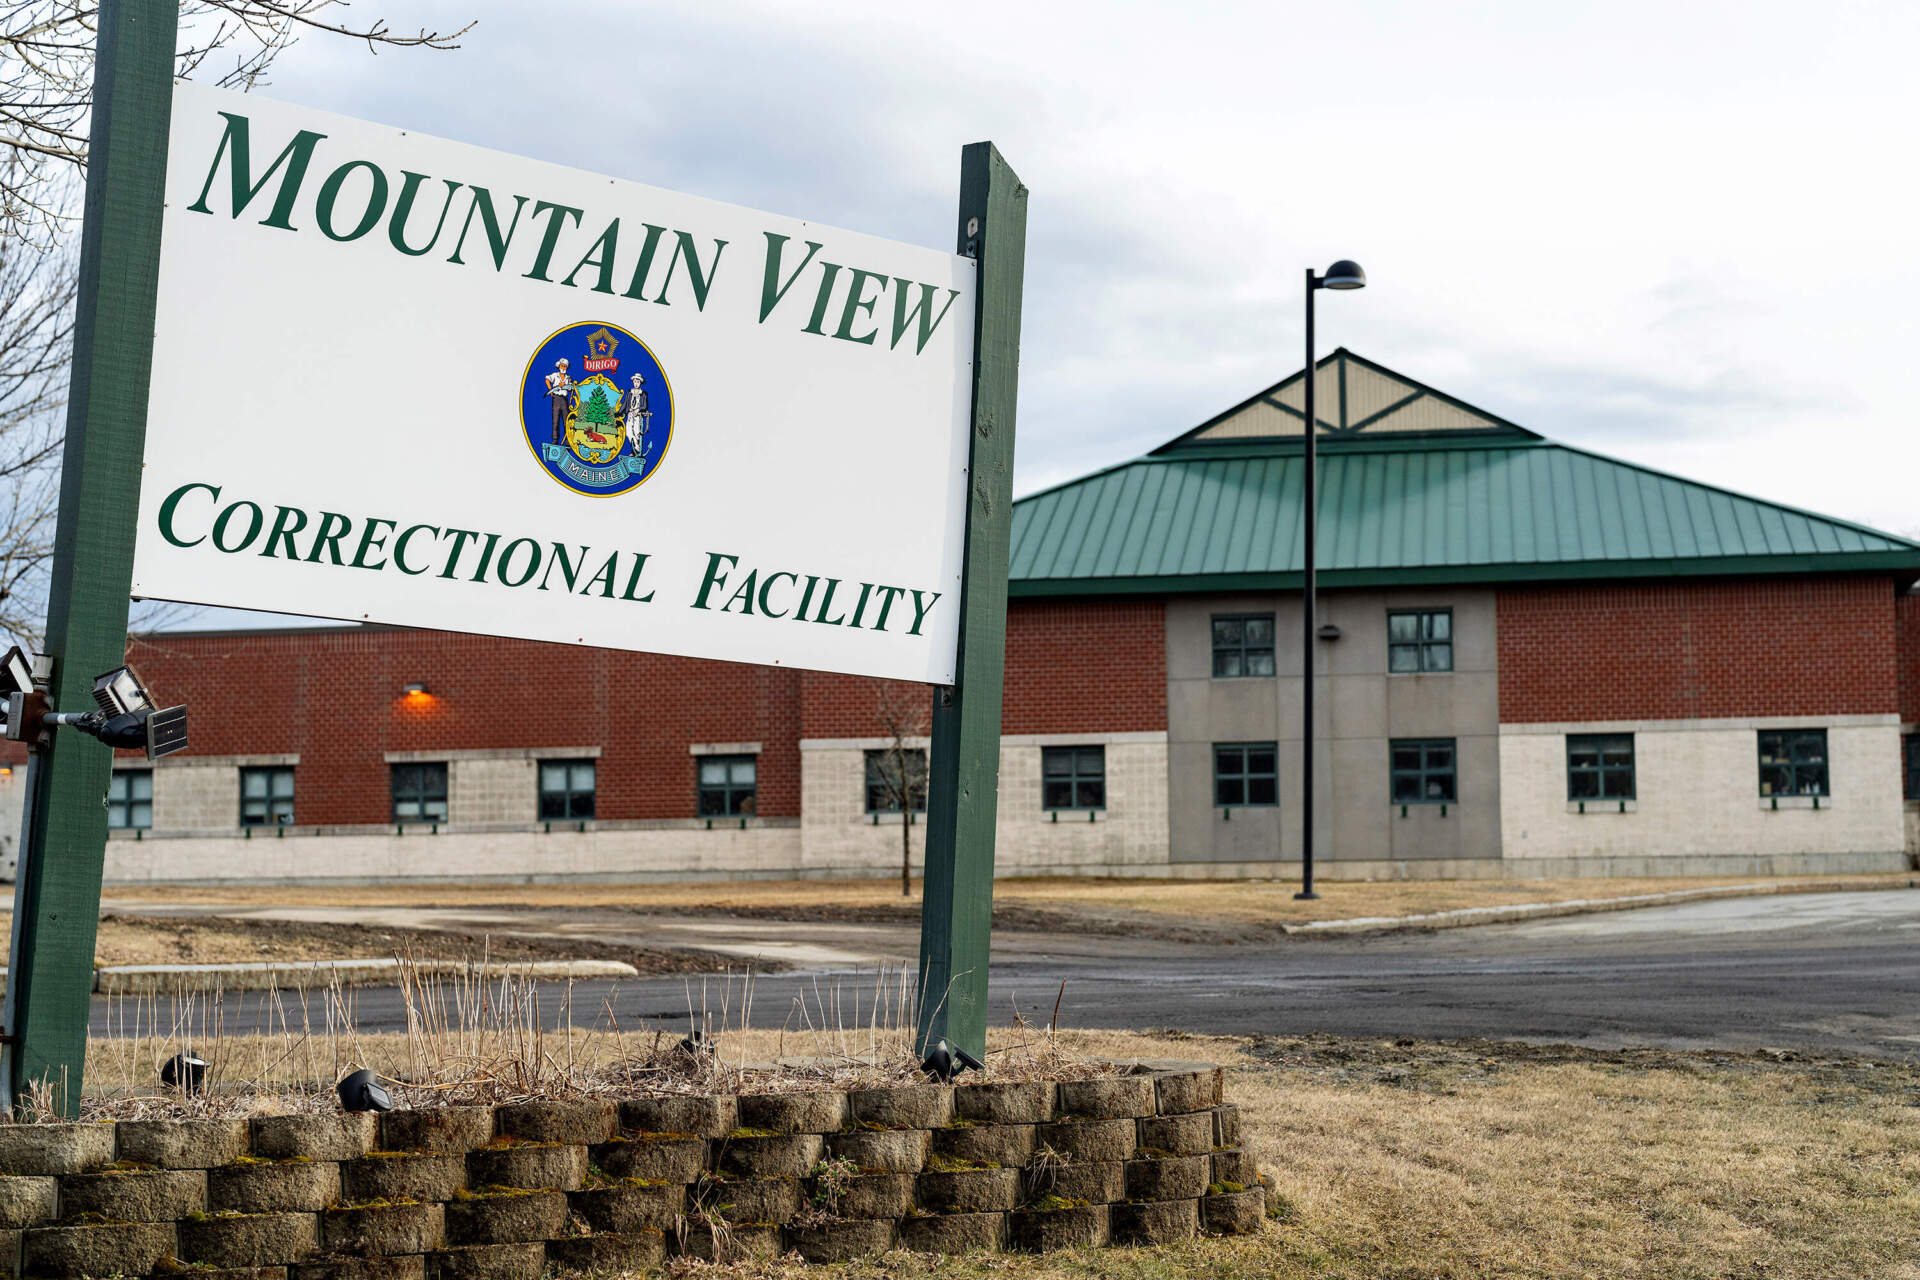 Maine closed its other juvenile prison in Penobscot County, which neighbors Aroostook. (Ashley L. Conti for The New York Times)